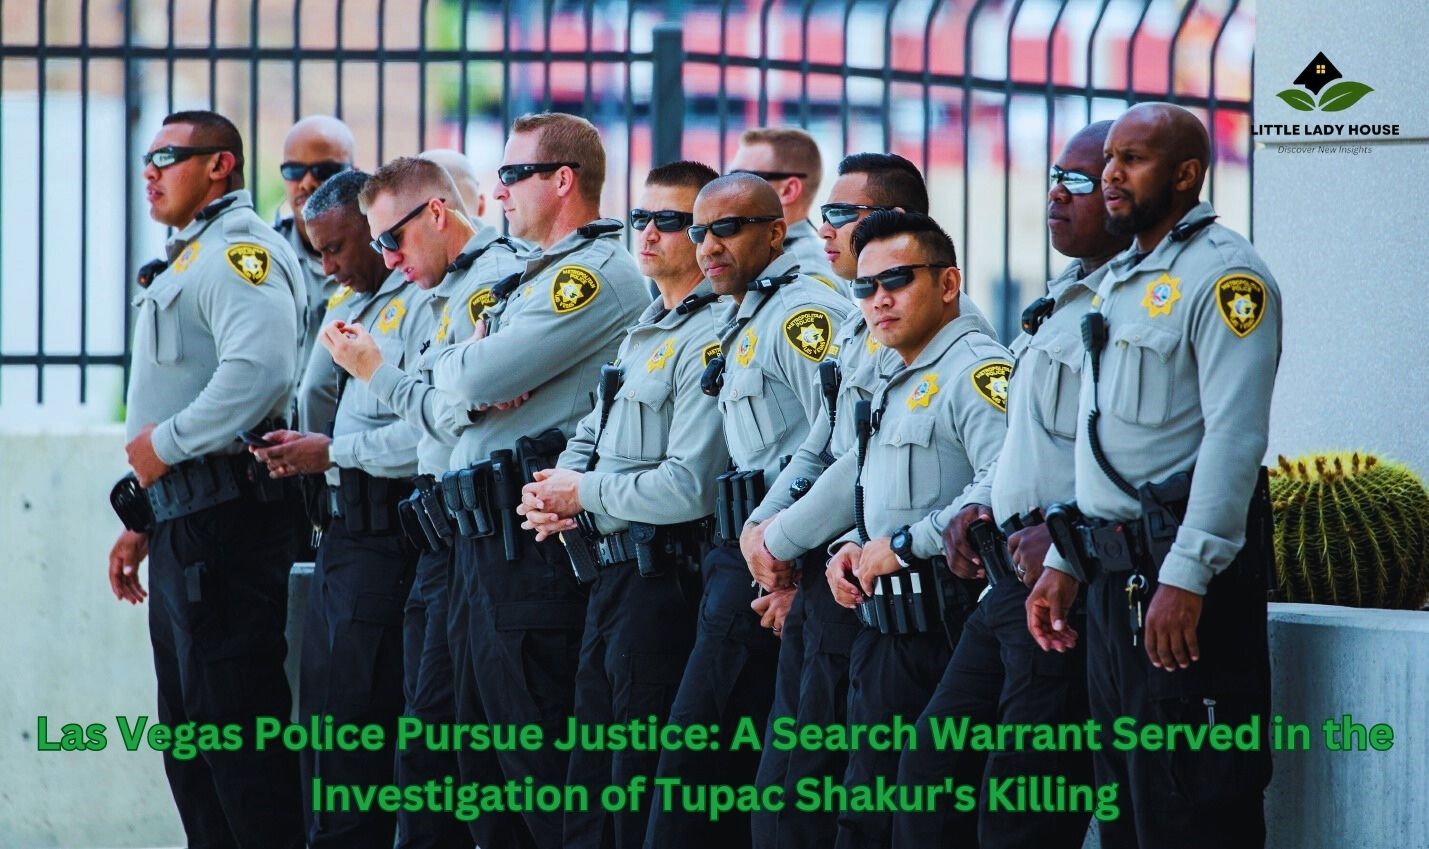 Las Vegas Police Pursue Justice: A Search Warrant Served in the Investigation of Tupac Shakur's Killing